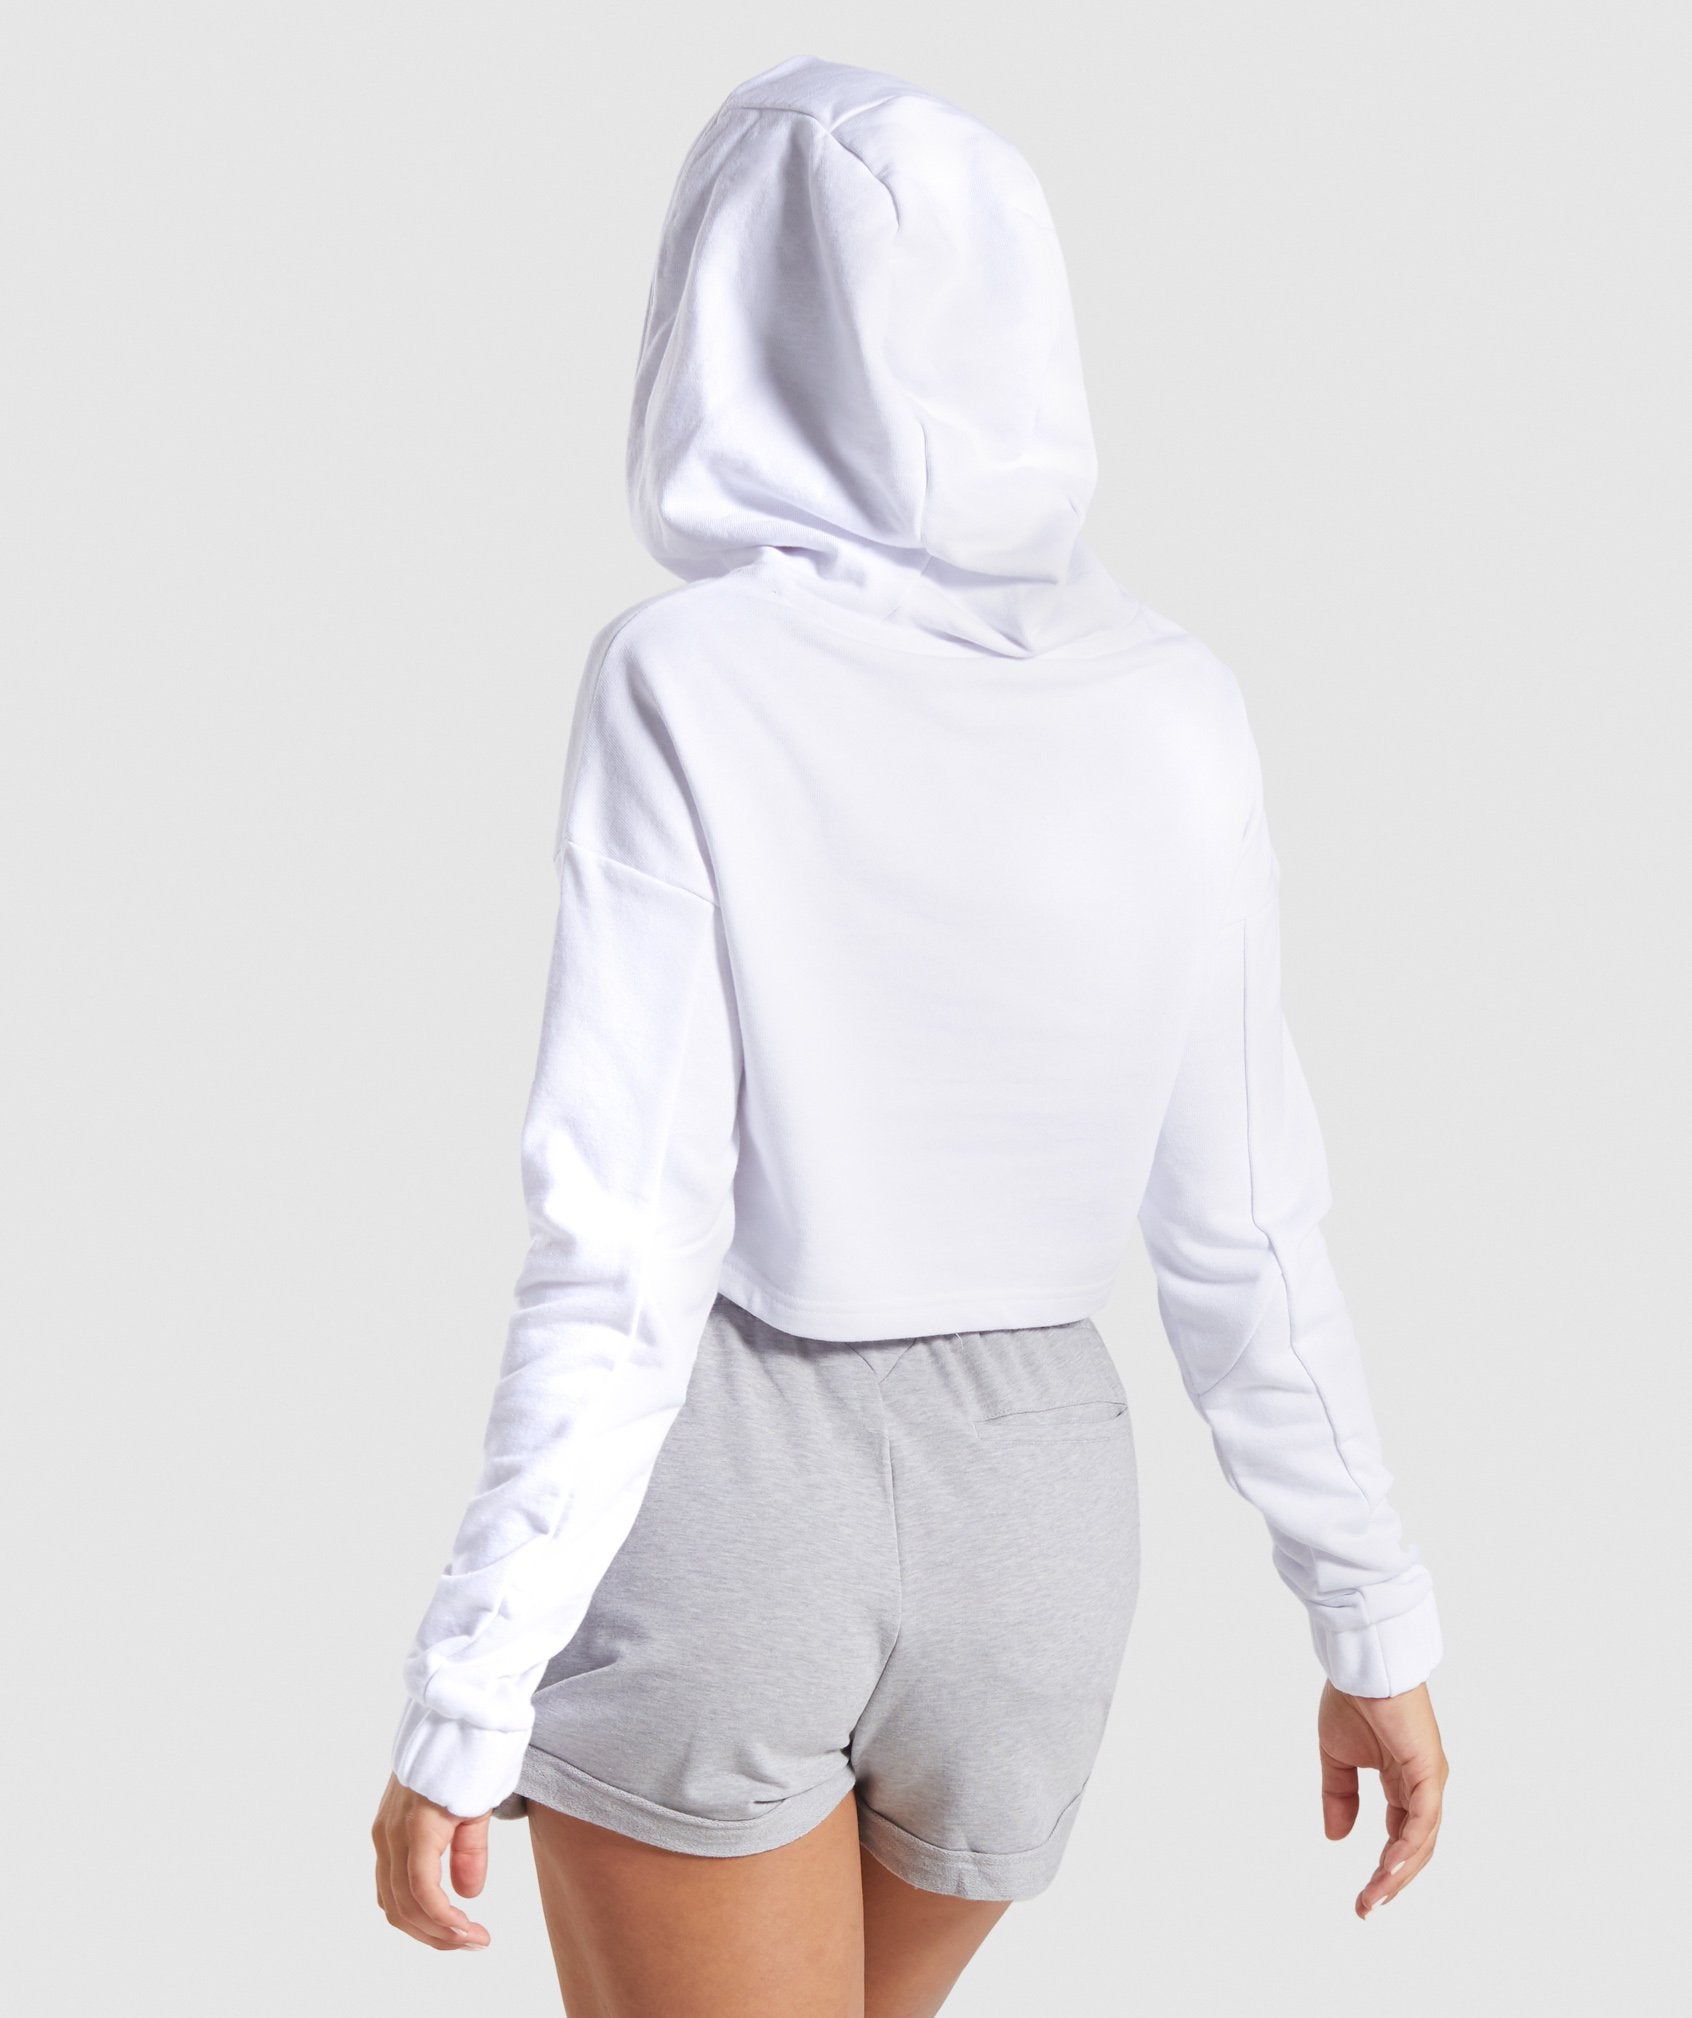 Signature Hoodie in White - view 2